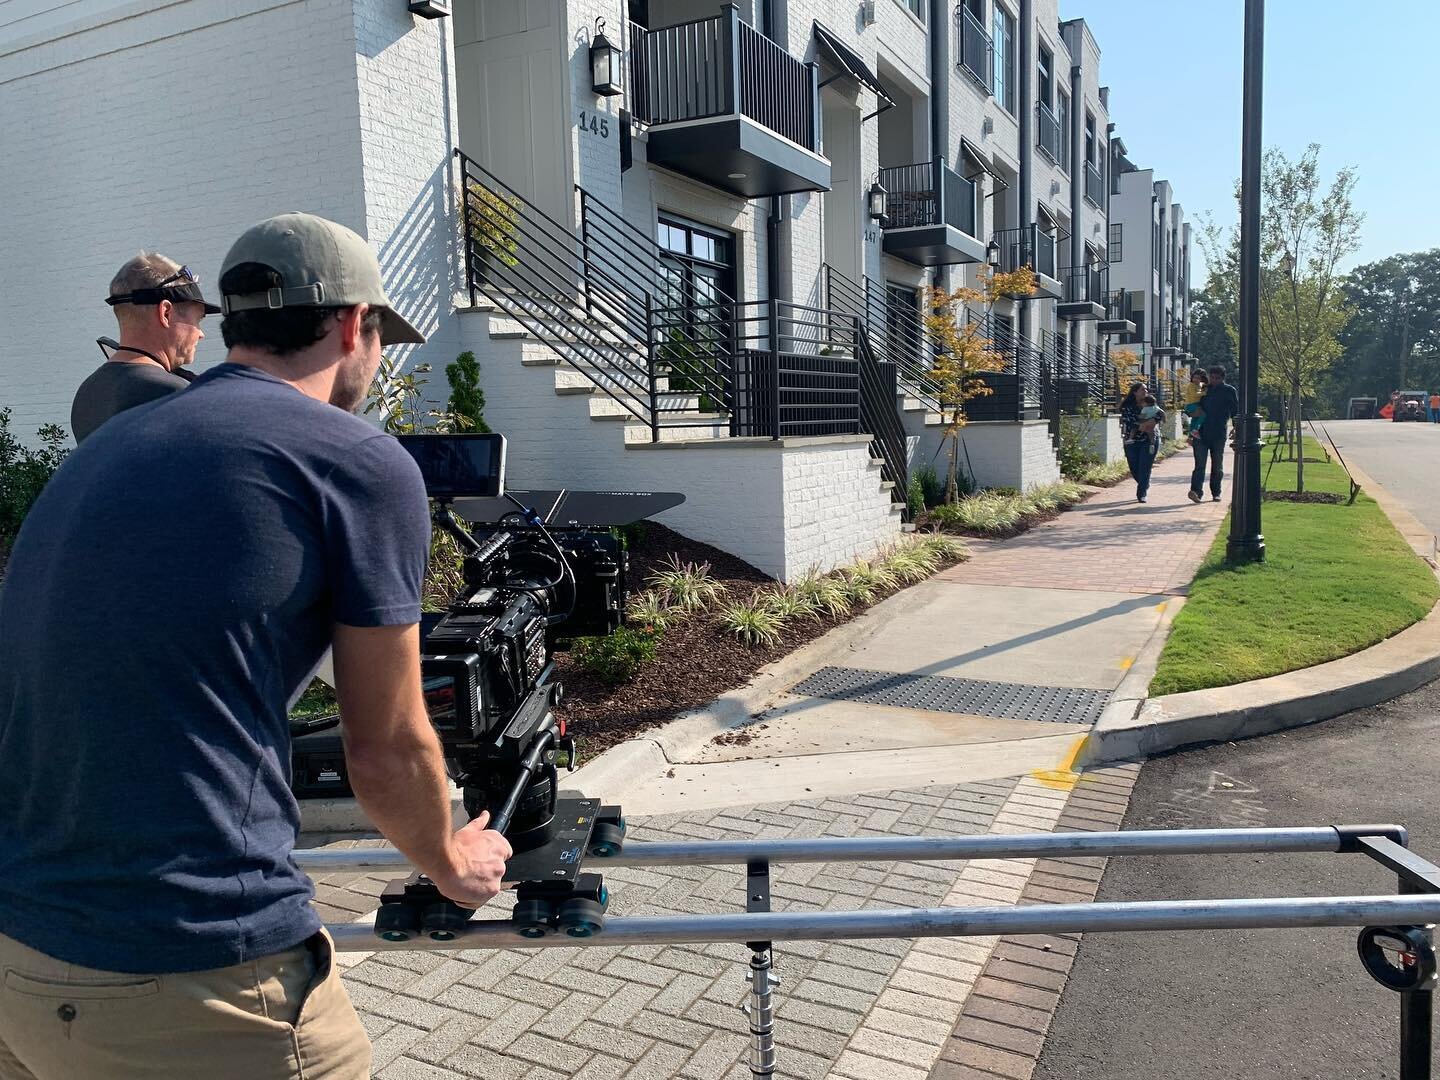 Great weather to be shooting outside today! 
.
.cc: @digitalpmedia 
.
#setlife
#ursaminipro